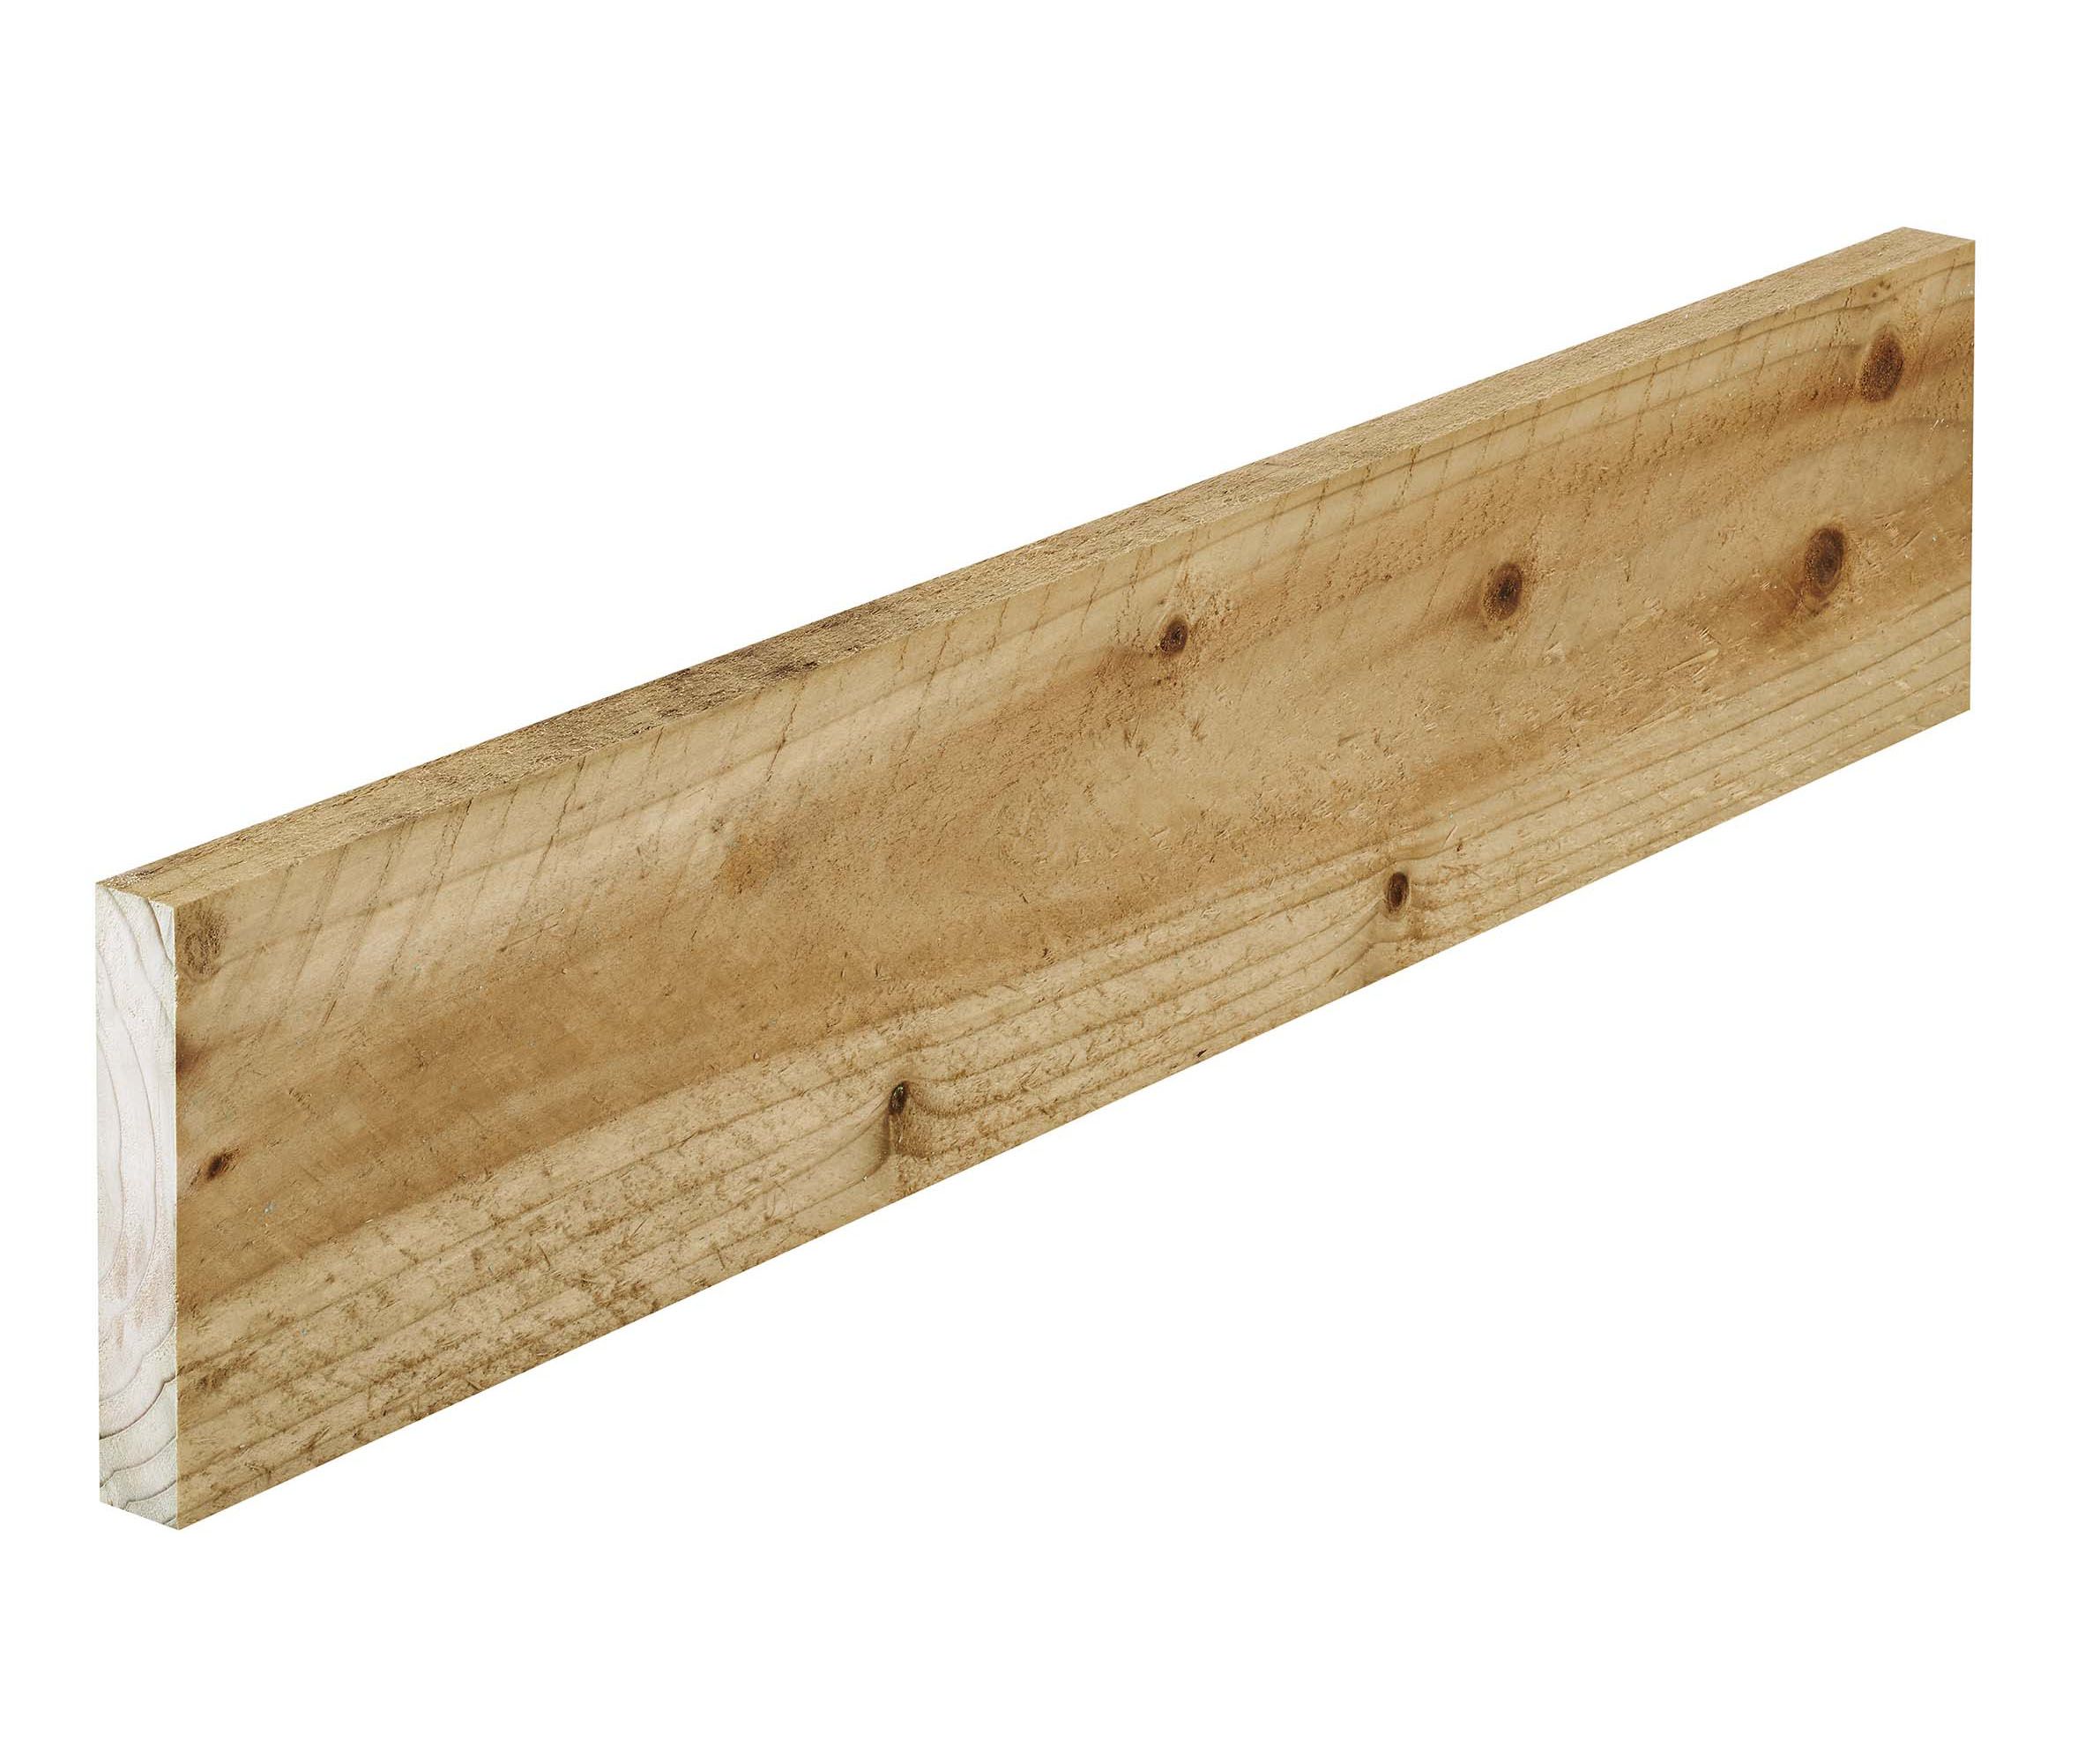 Treated Whitewood Timber (L)1.8m (W)125mm (T)22mm, Pack of 8